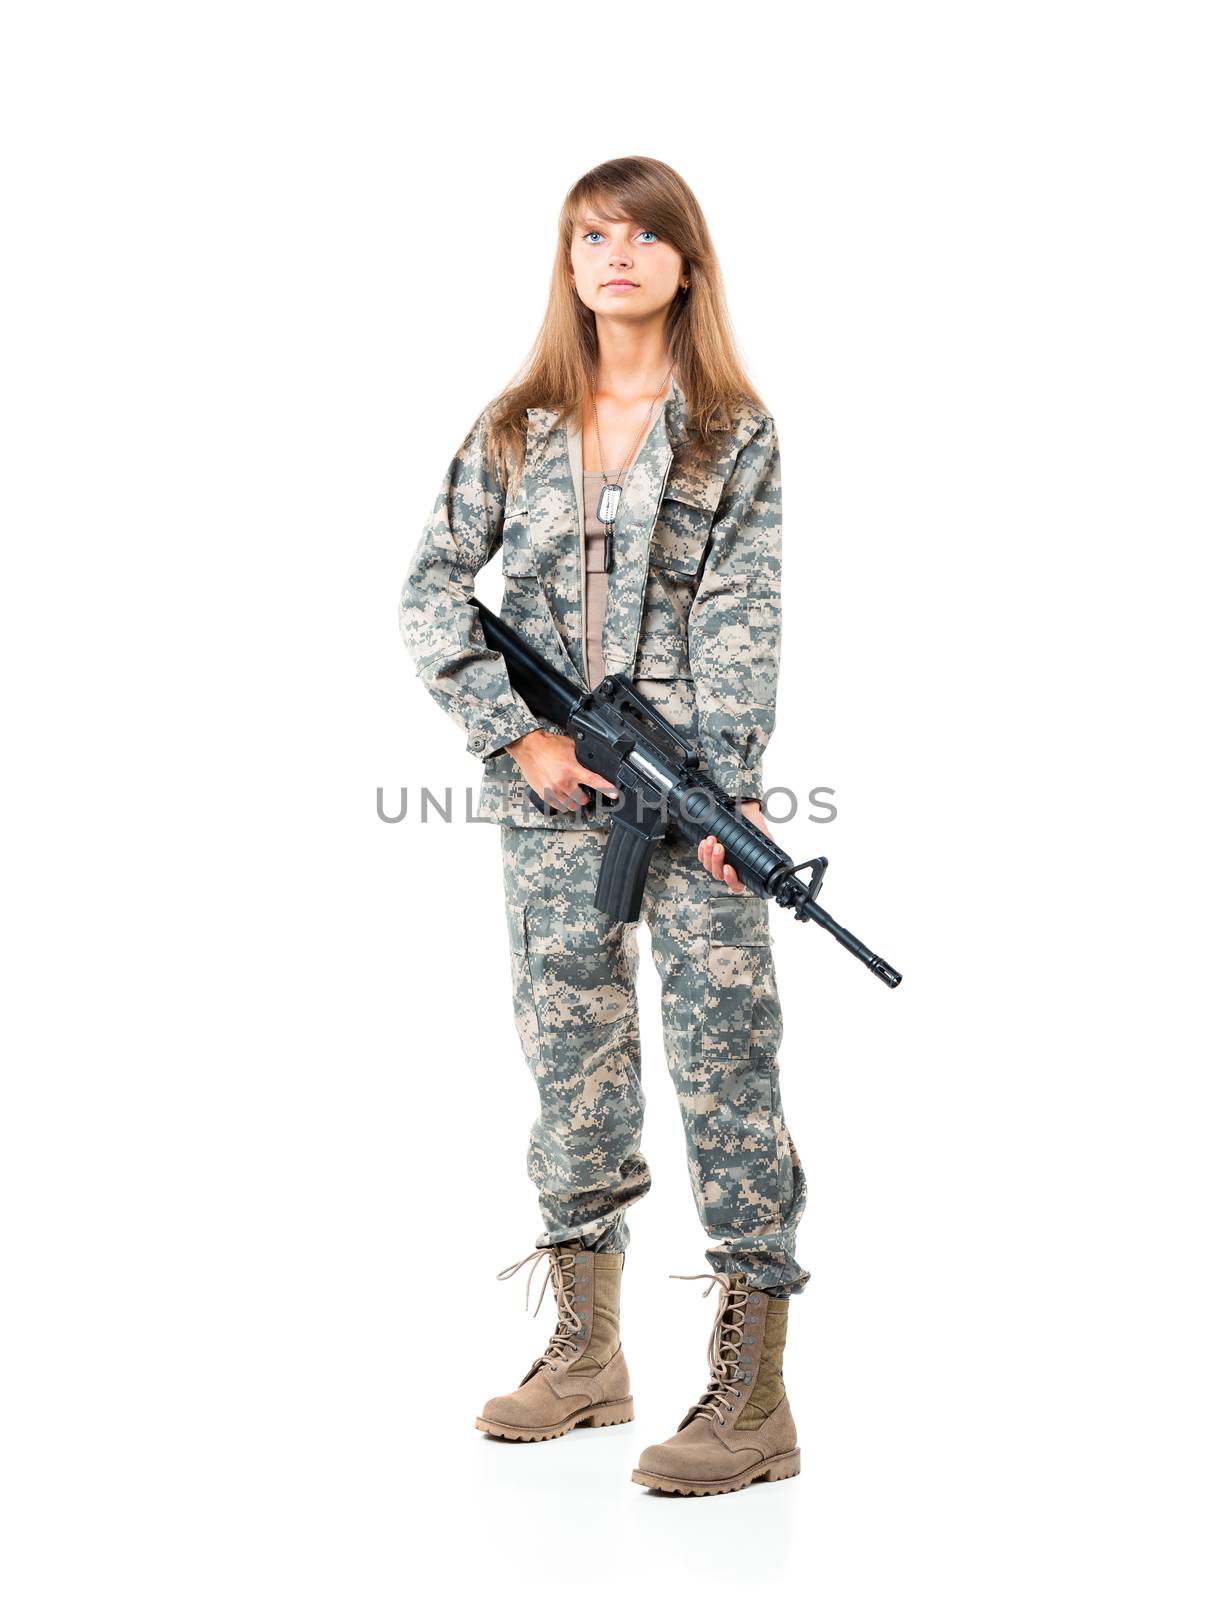 Soldier young beautyful girl dressed in a camouflage with a gun in his hand on white background